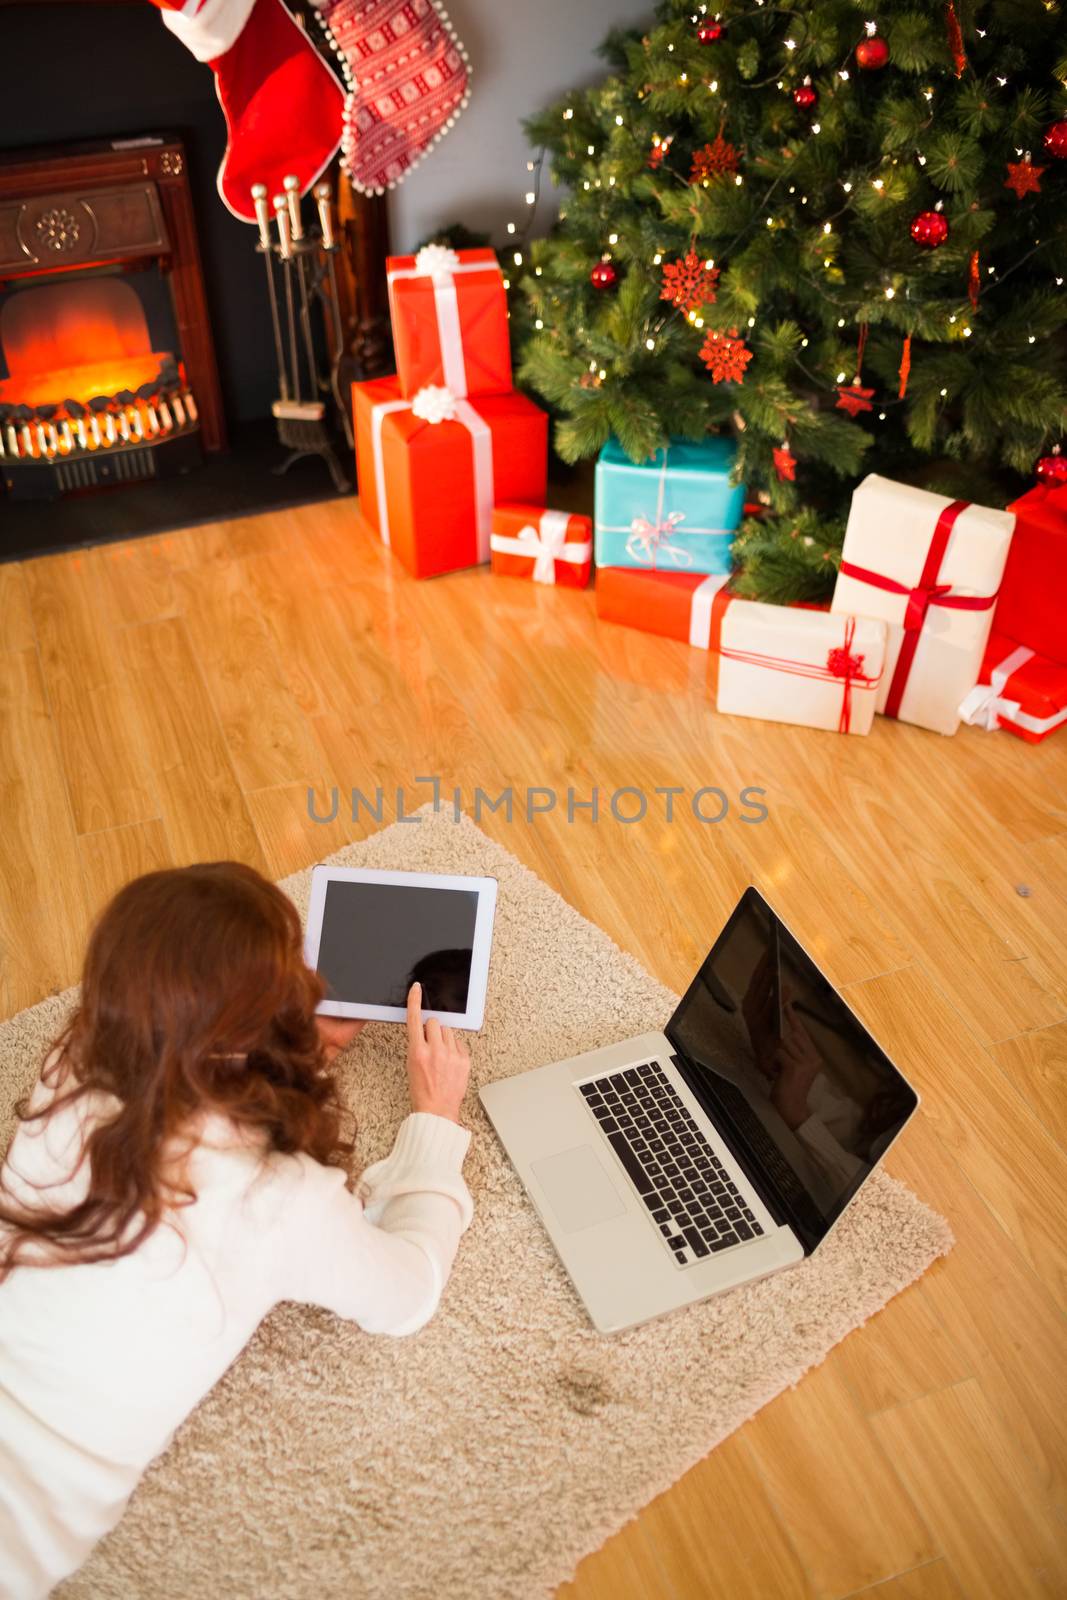 Pretty woman lying on floor using technology at Chritmas at home in the living room